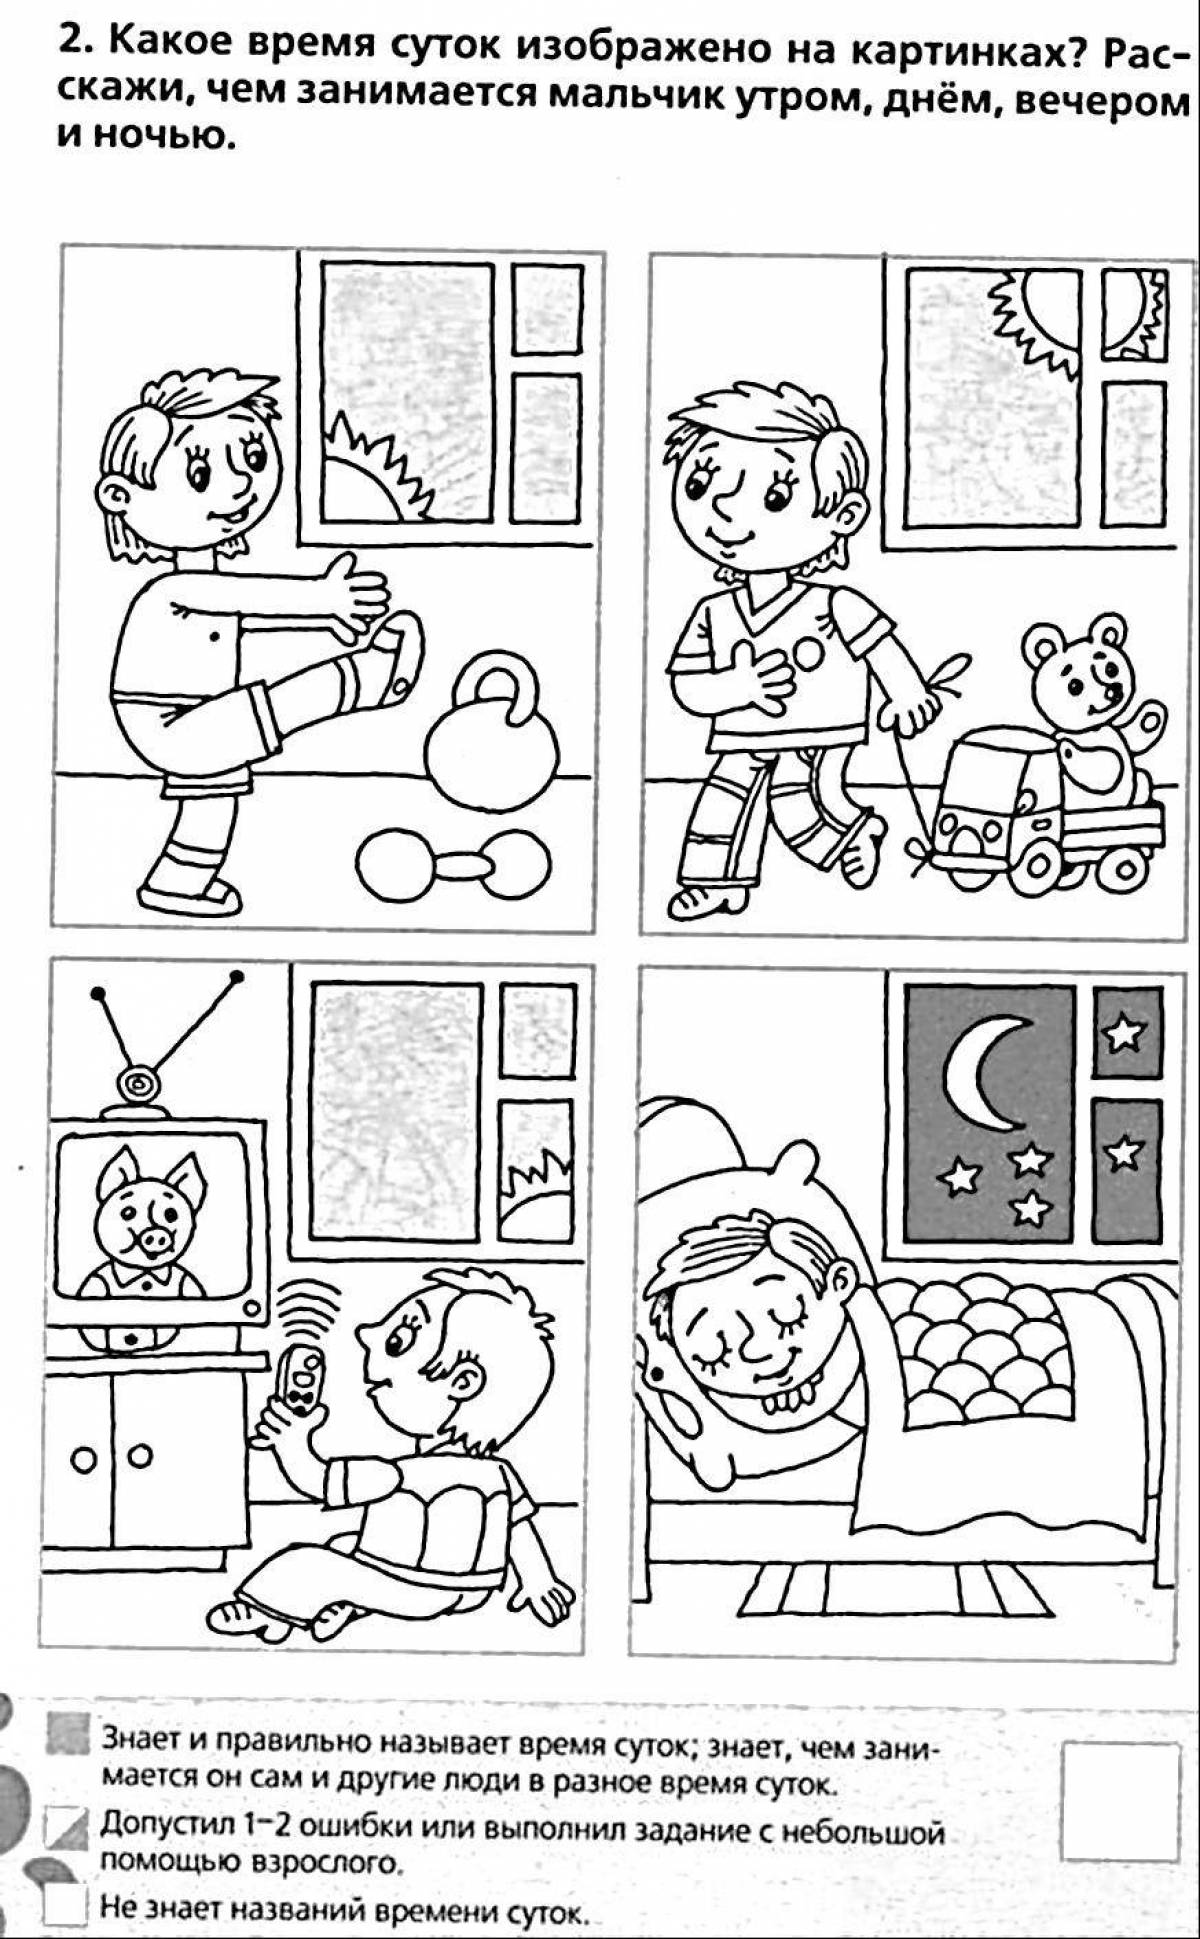 Glorious day and night coloring pages for kids